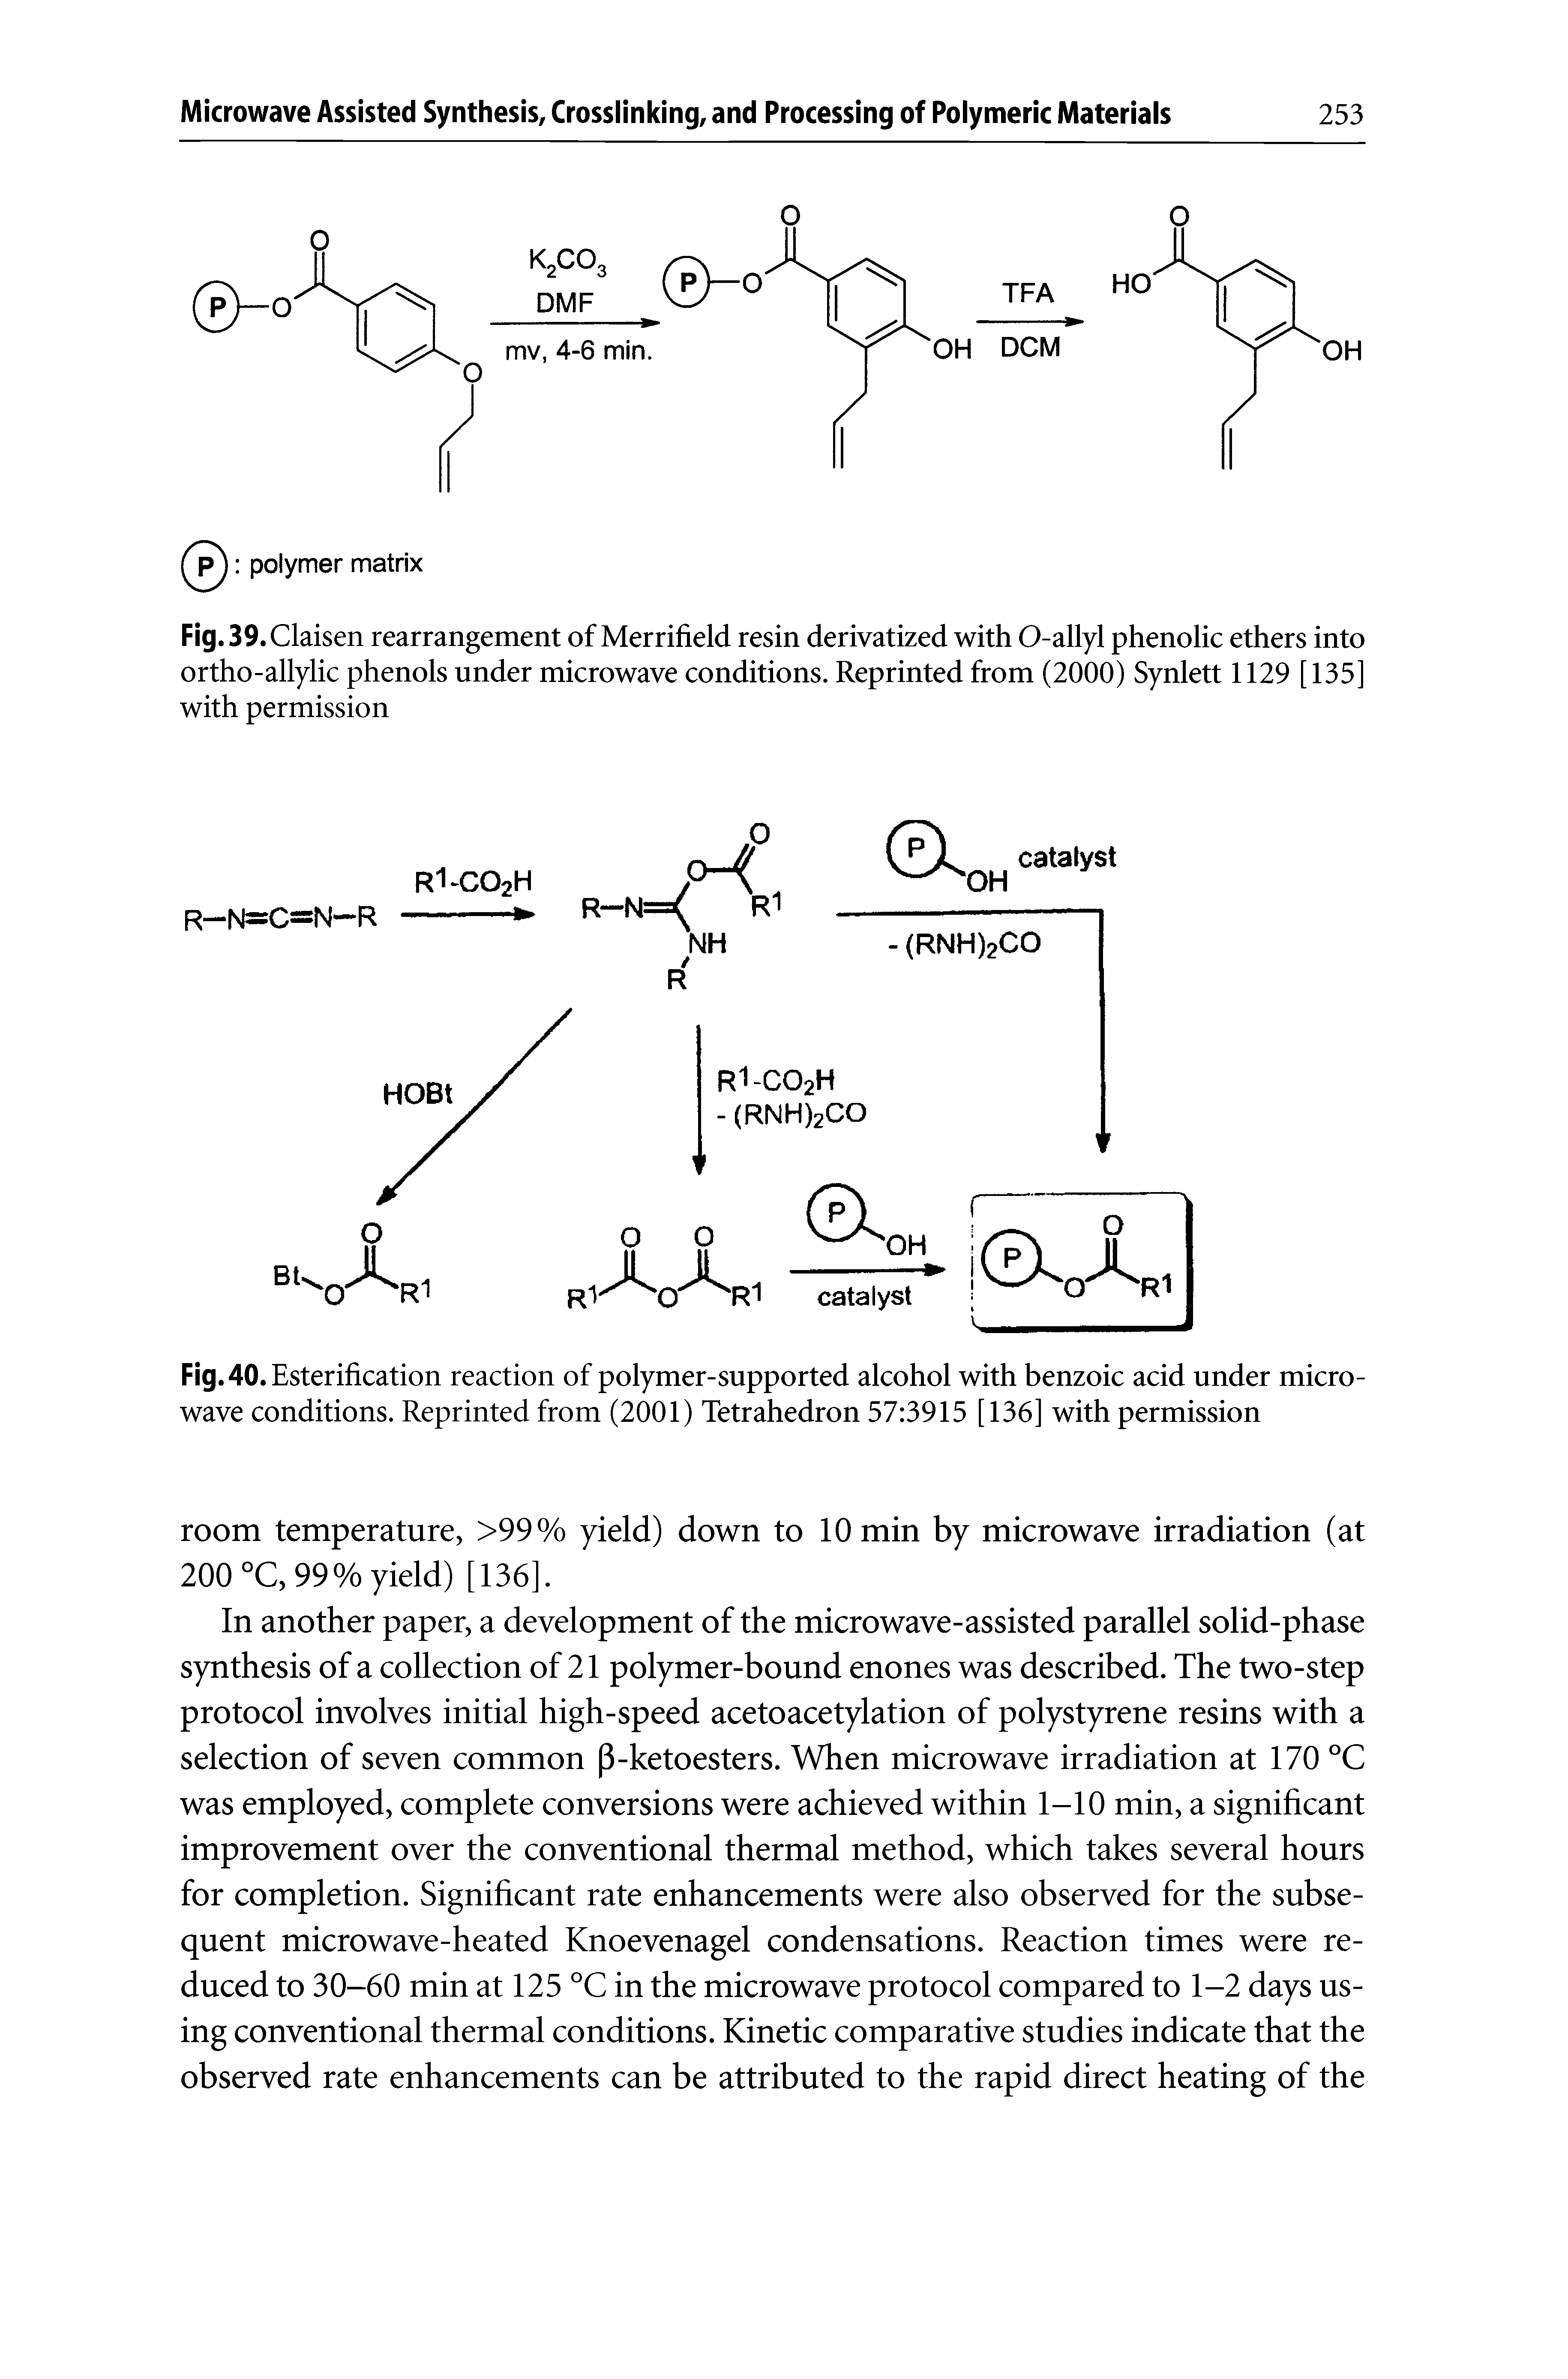 Fig.39.Claisen rearrangement of Merrifield resin derivatized with O-allyl phenolic ethers into ortho-allylic phenols under microwave conditions. Reprinted from (2000) Synlett 1129 [135] with permission...